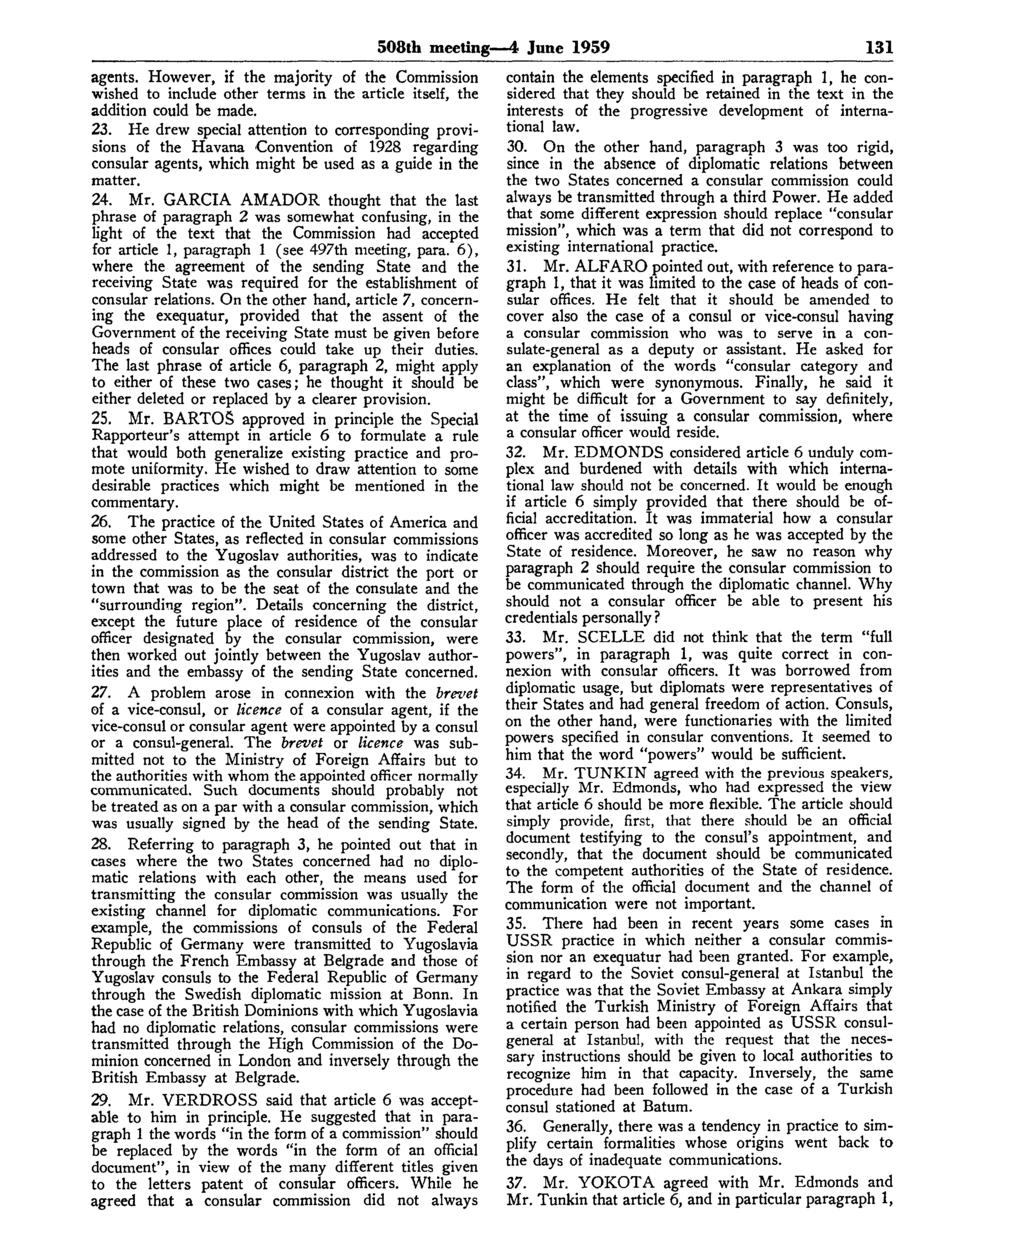 508th meeting 4 June 1959 131 agents. However, if the majority of the Commission wished to include other terms in the article itself, the addition could be made. 23.